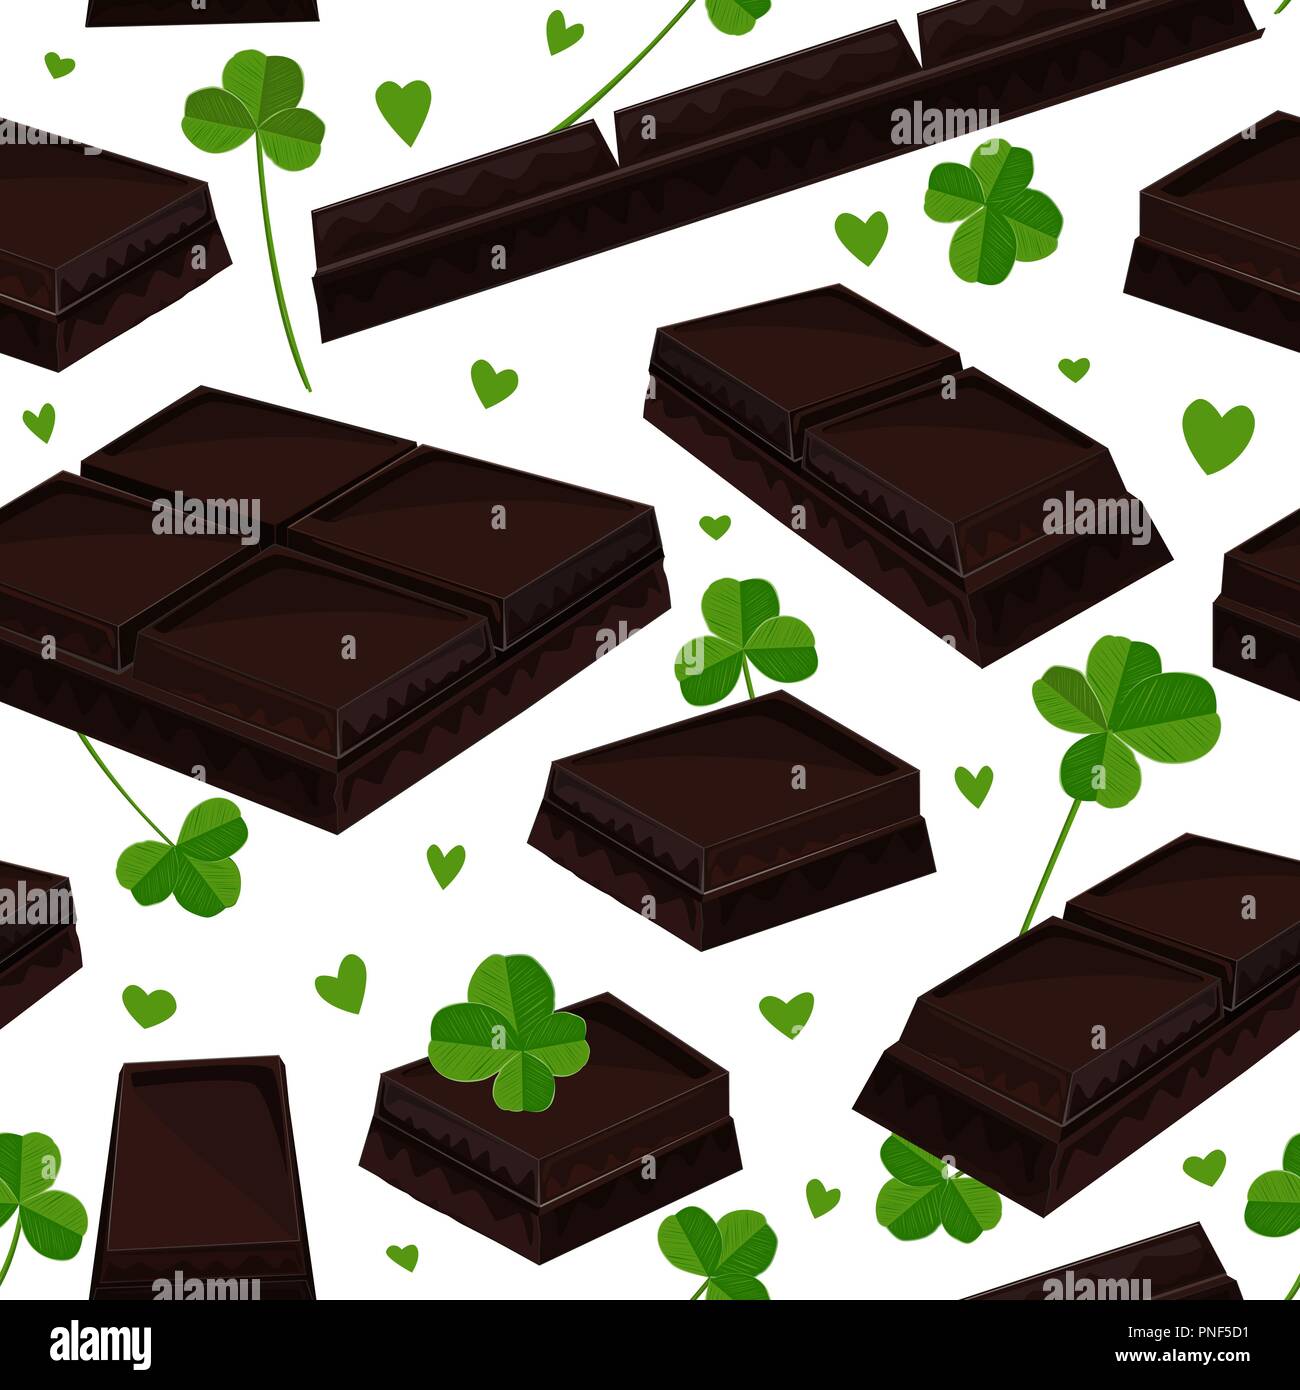 Stylish seamless St. Patrick's day background with clover leaves and chocolate bars. Vector illustration Stock Vector